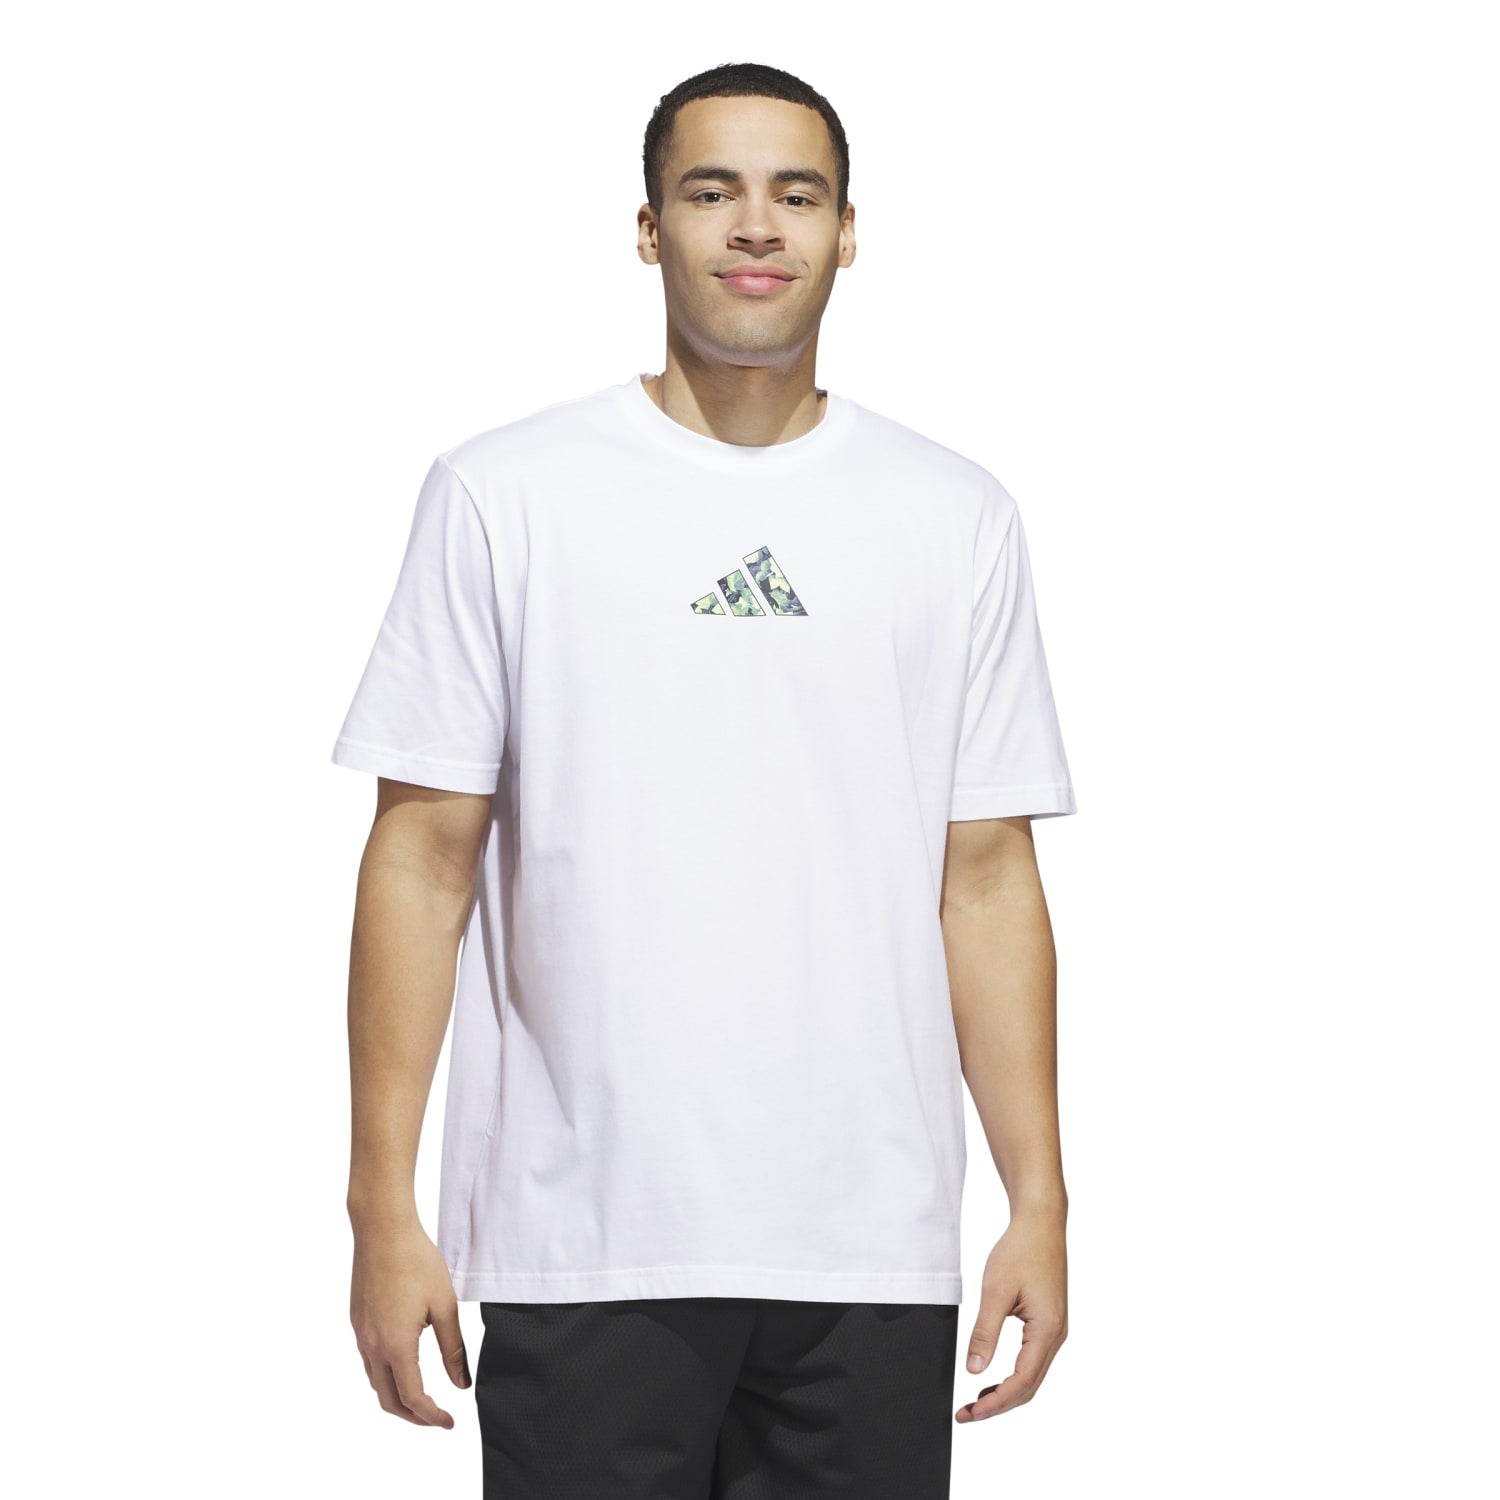 Adidas FY3729 Basketball Men Lil Stripe Photoreal Graphic Tee White IN6376 - T - SHIRTS Canada